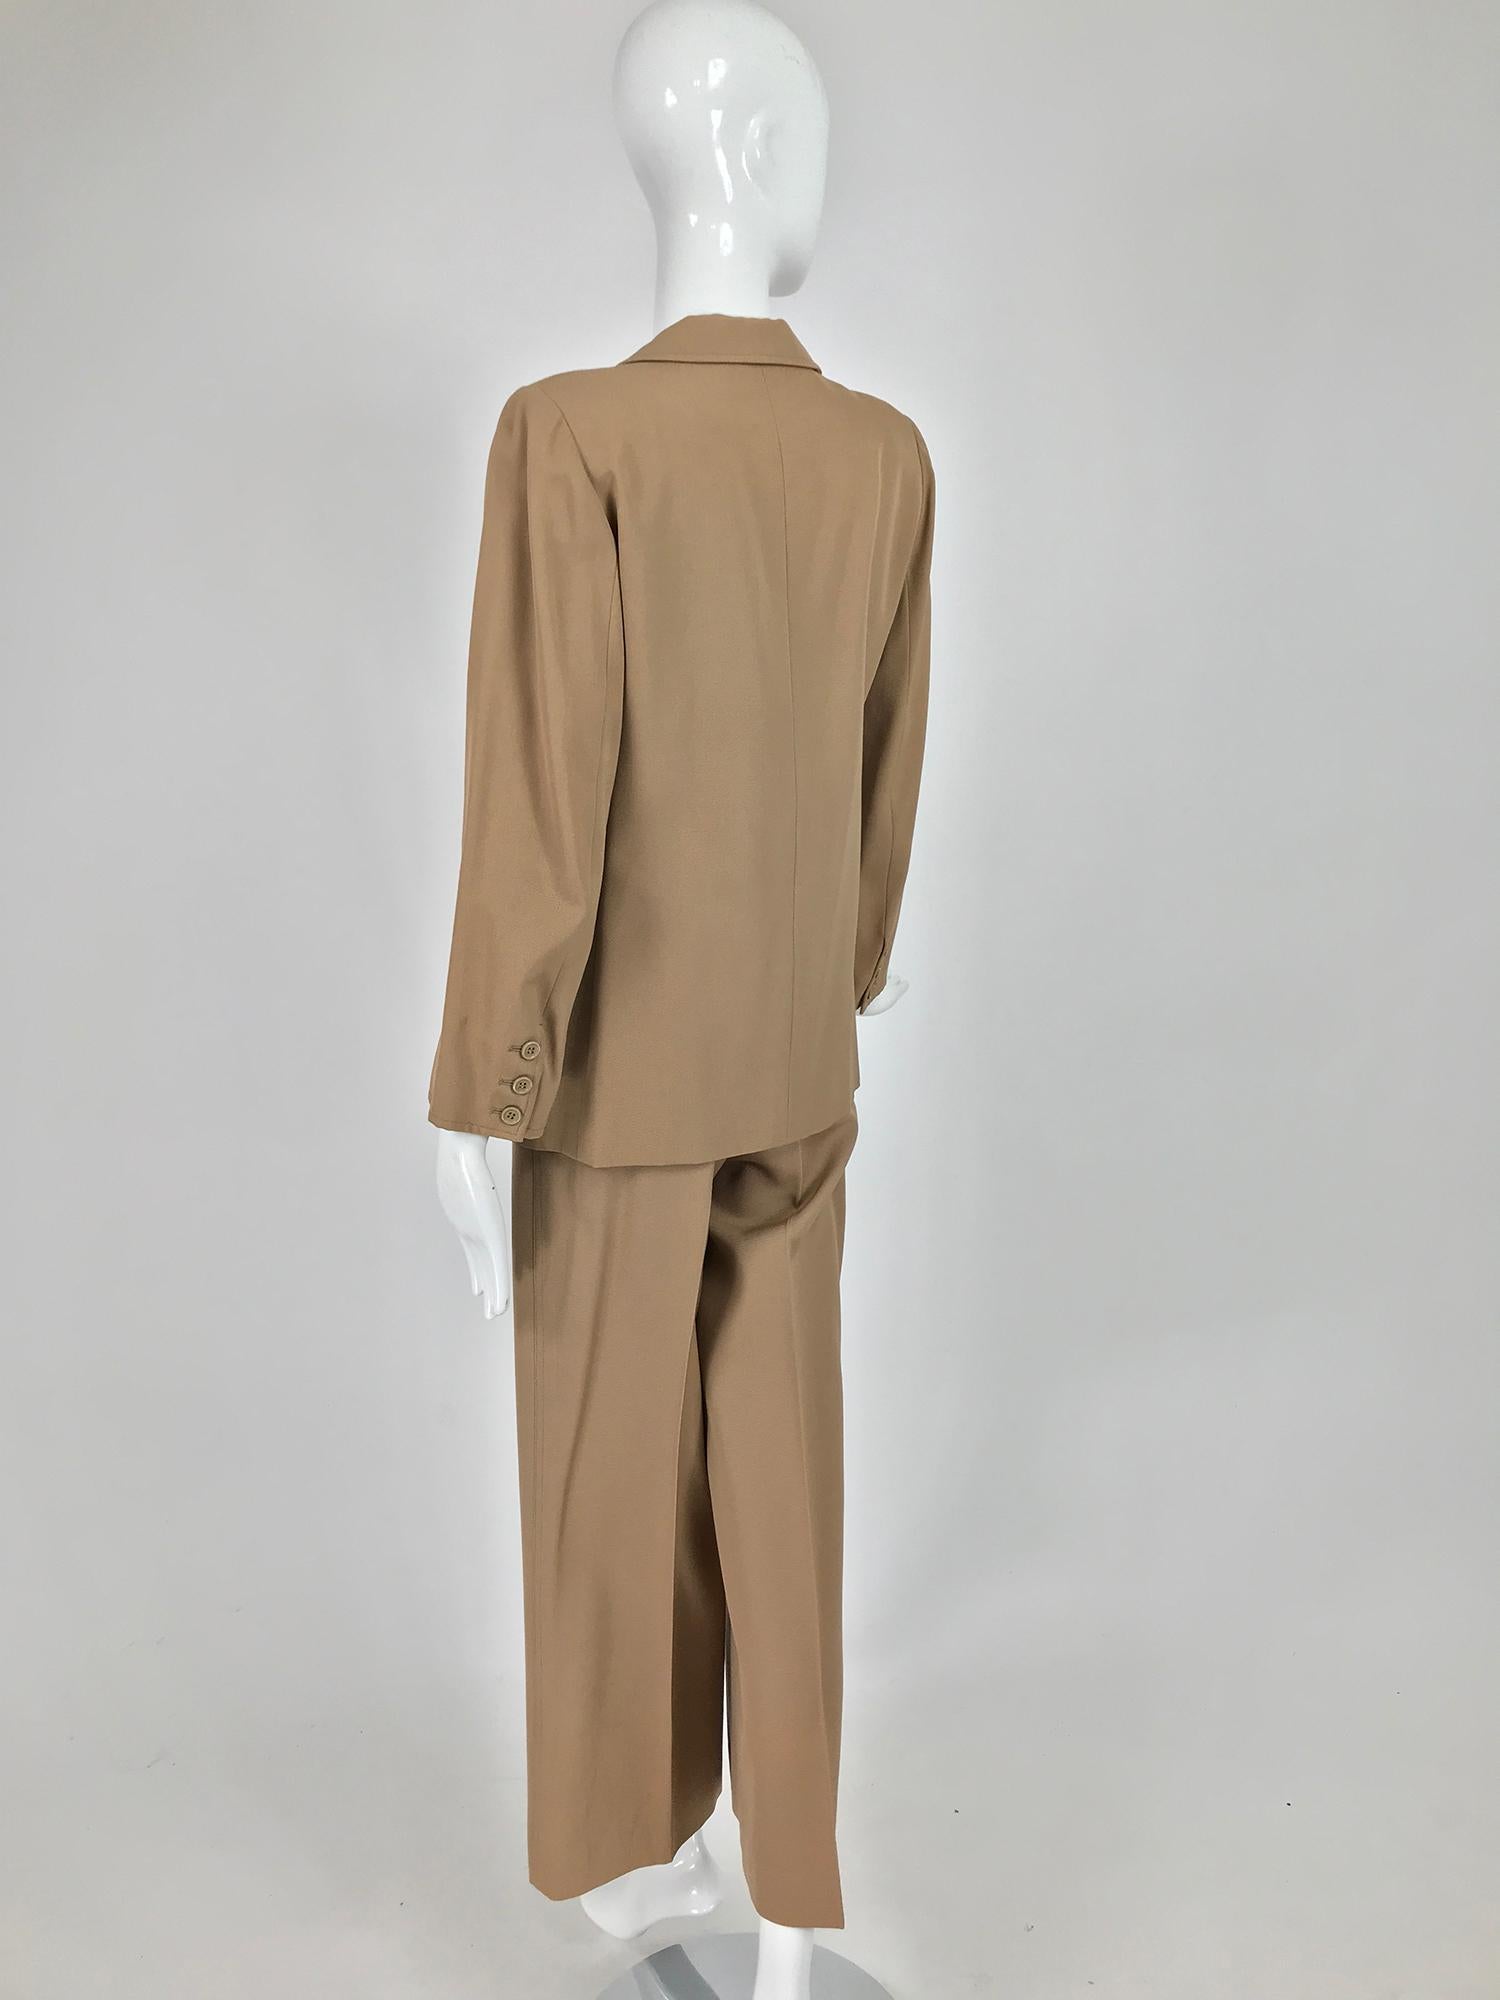 Yves Saint Laurent Khaki Tan Wool Twill Patch Pocket Pant Suit 1970s In Good Condition In West Palm Beach, FL